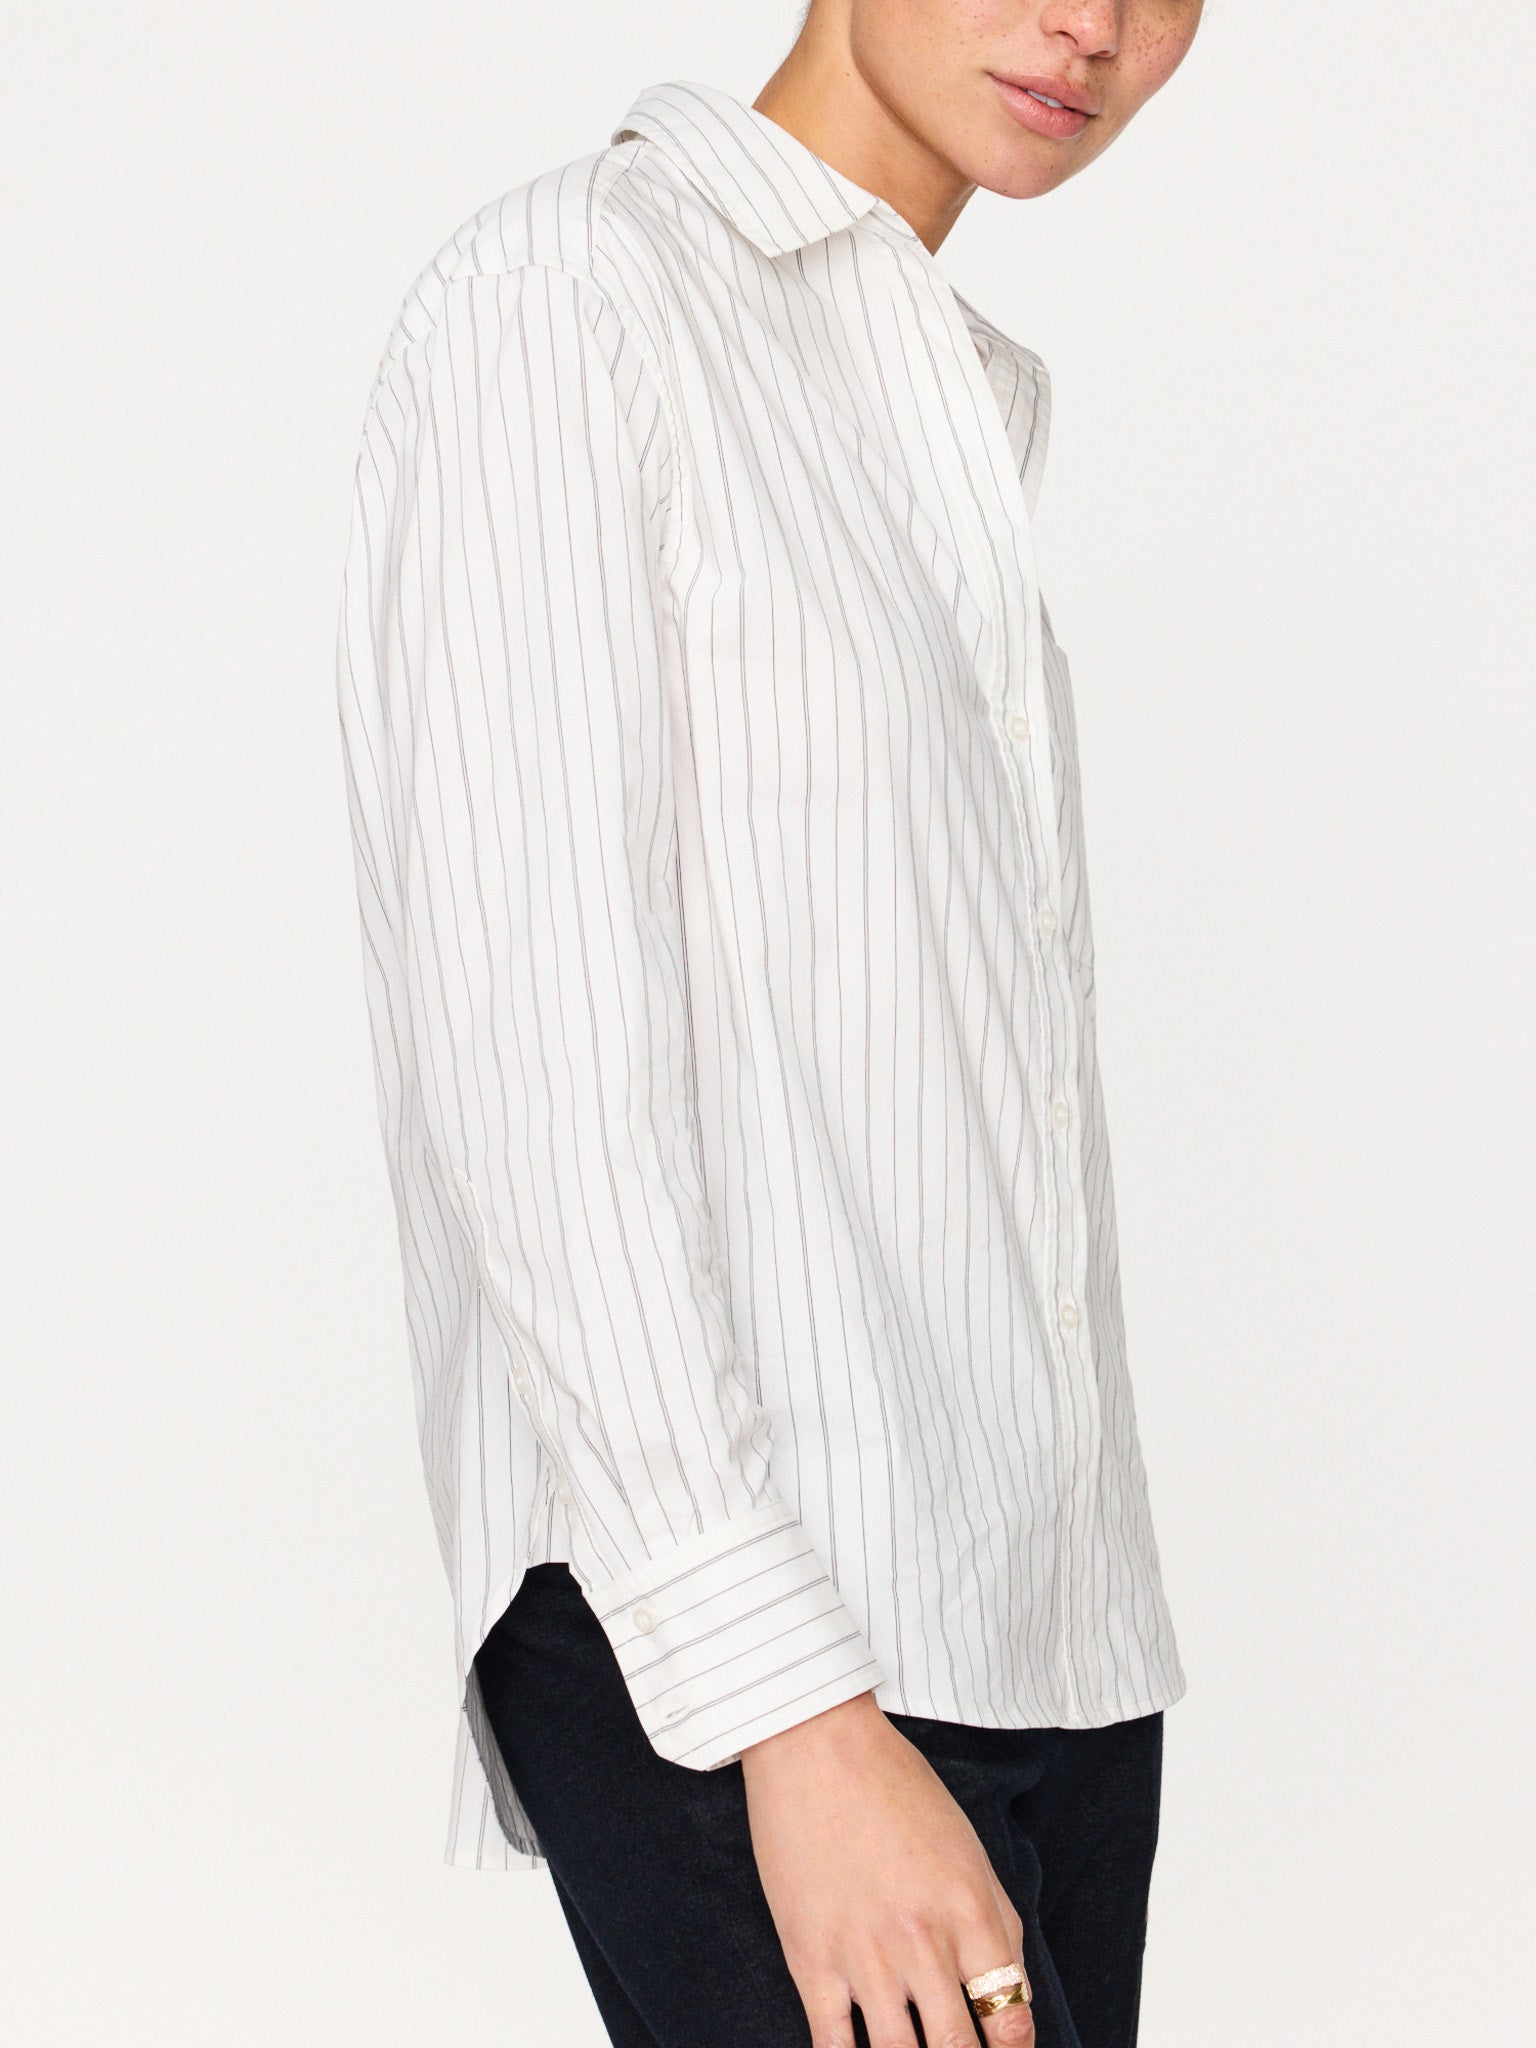 Everyday button up white stripe shirt side view